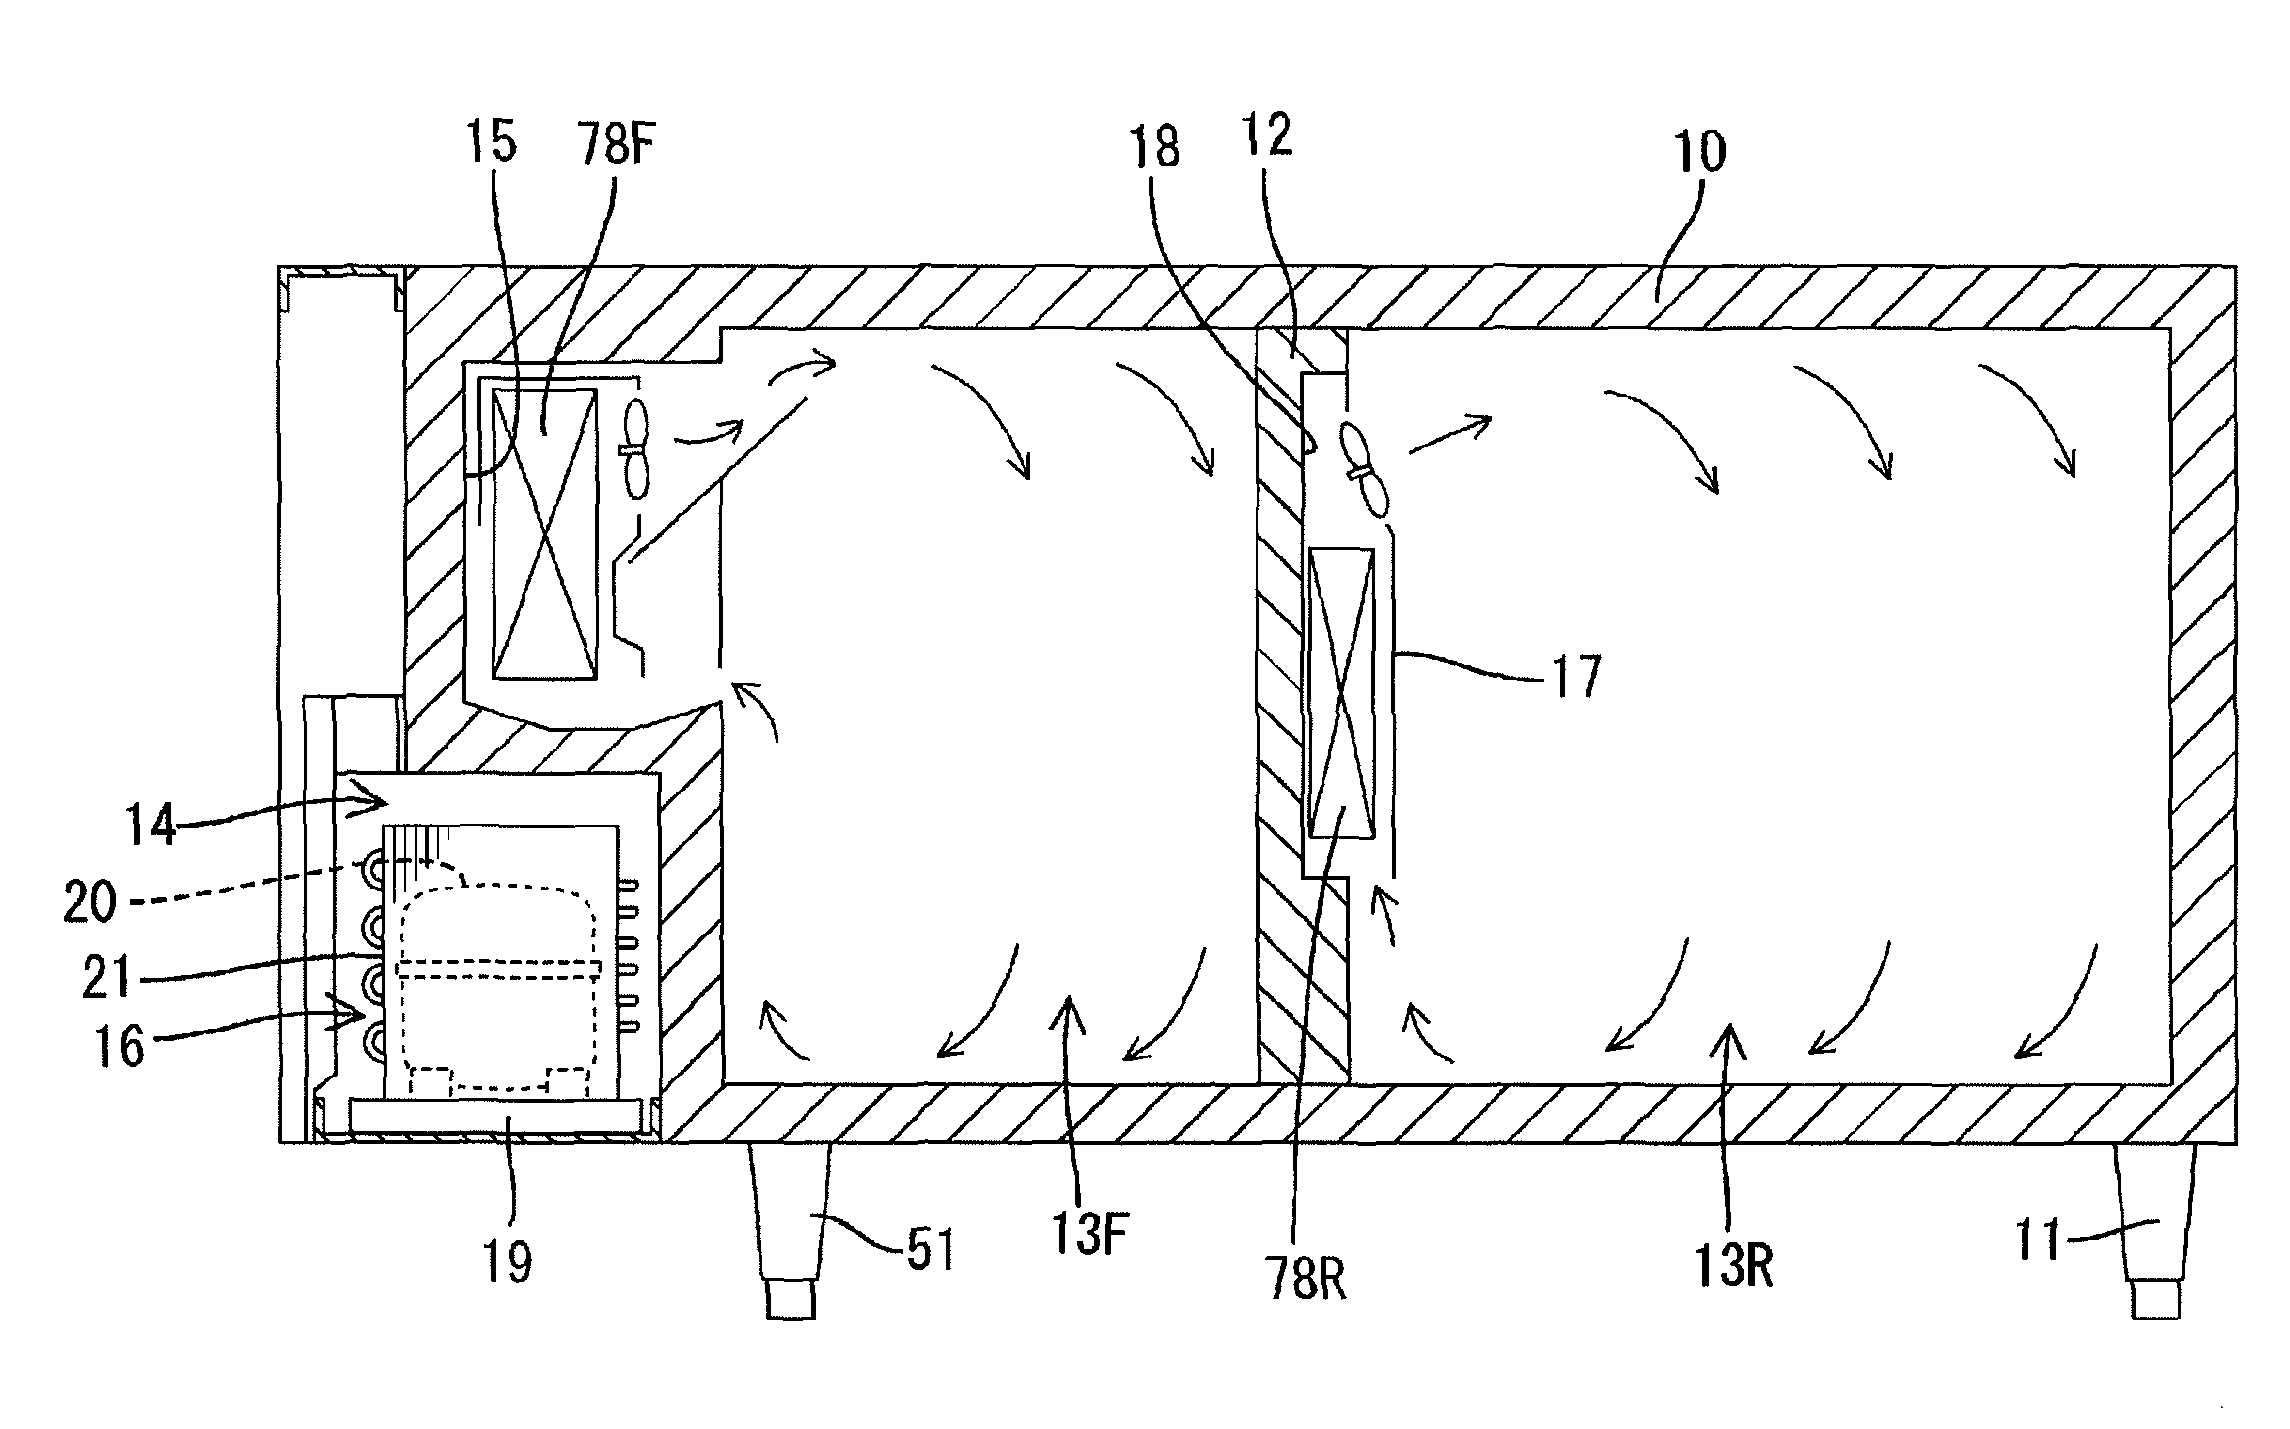 Cooling storage and method of operating the same